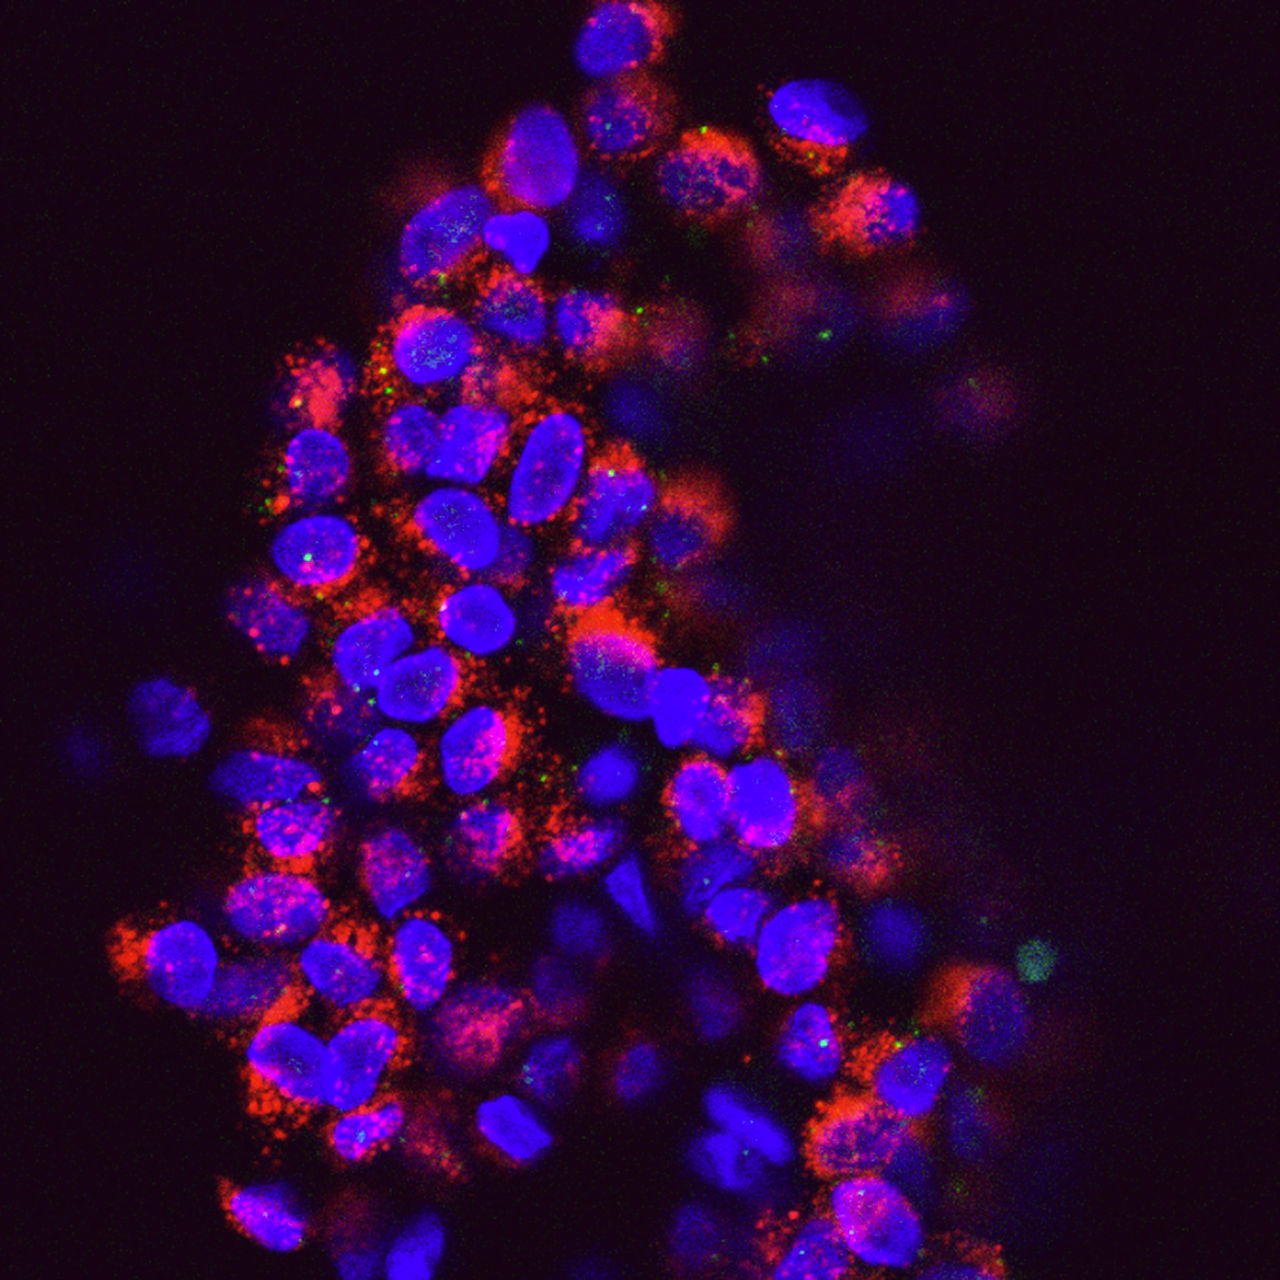 This cluster of circulating tumor cells (CTCs, shown in red) originated from the blood of a breast cancer patient. CTCs are an important focus of cancer research because they provide a key target for new treatments.